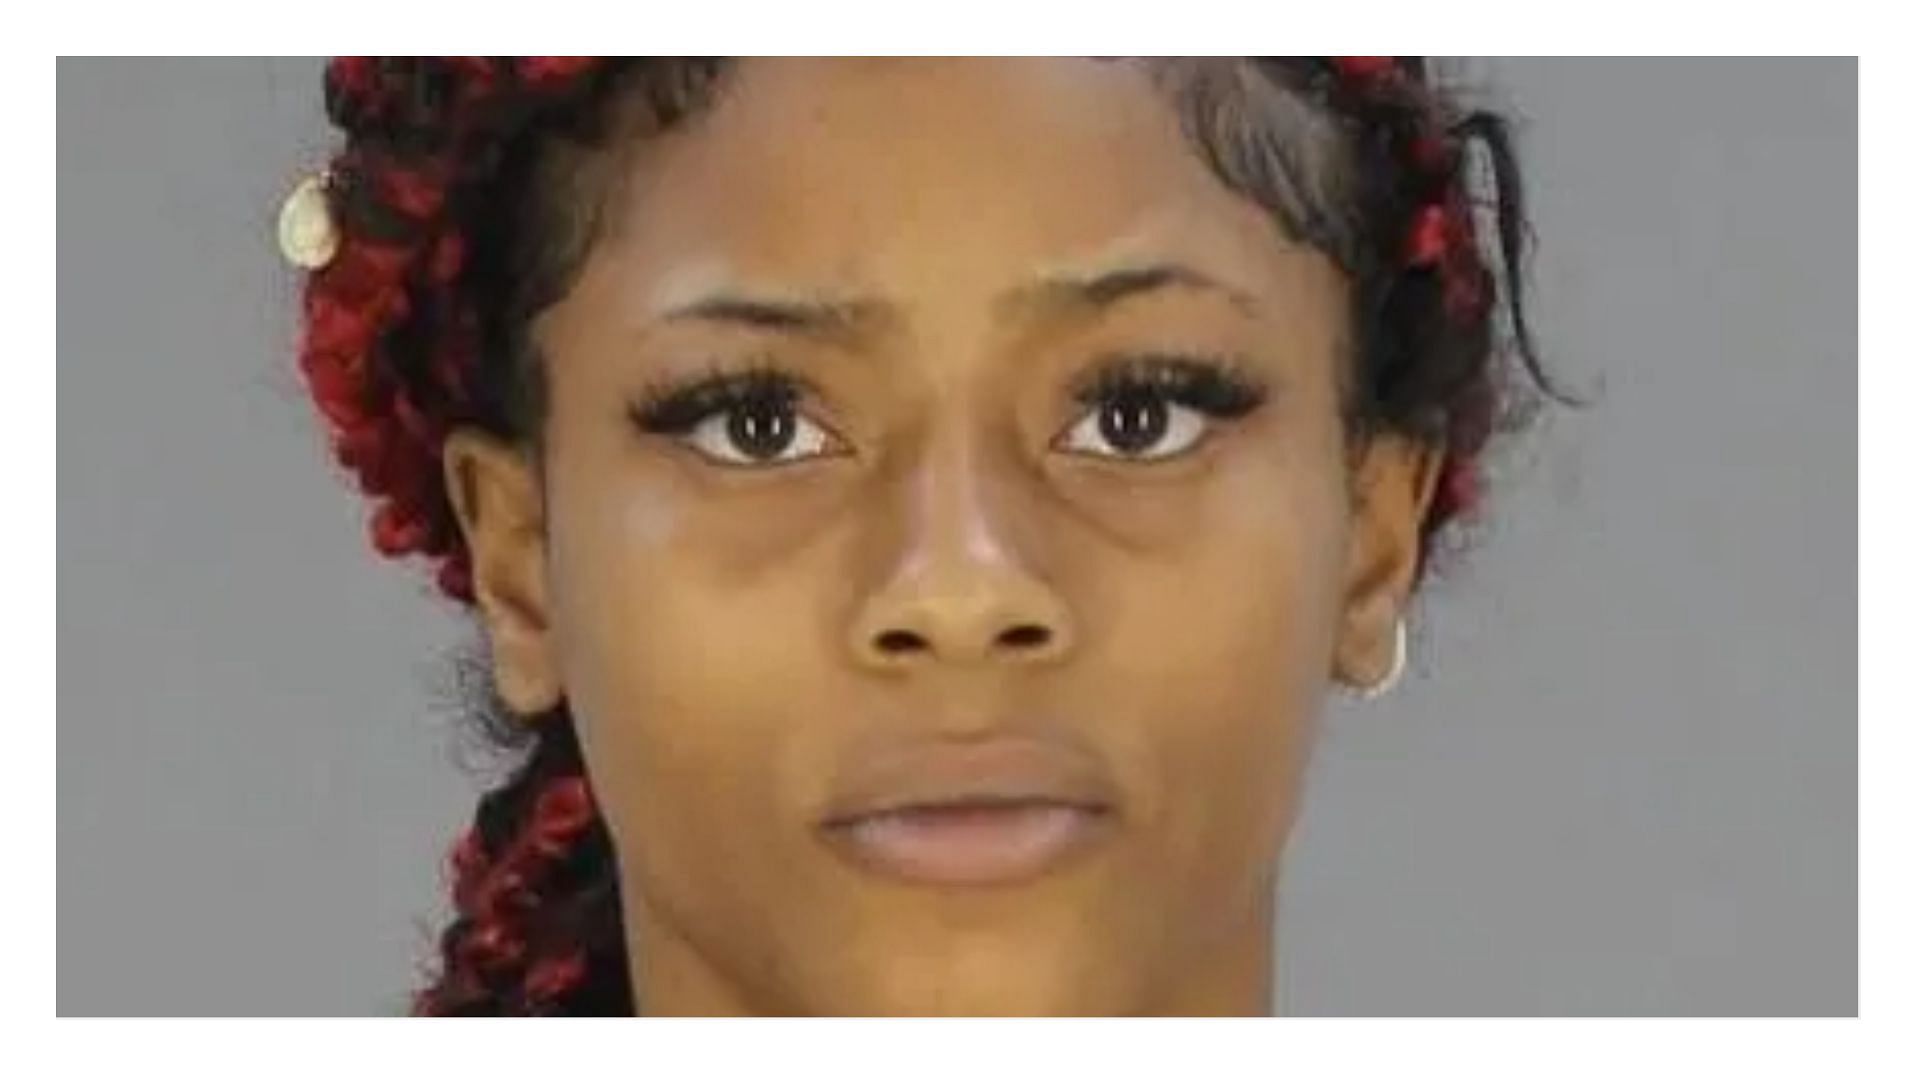 Kimora Hodges was charged with the murder of an infant child under her care (image via Roseville Police Department)